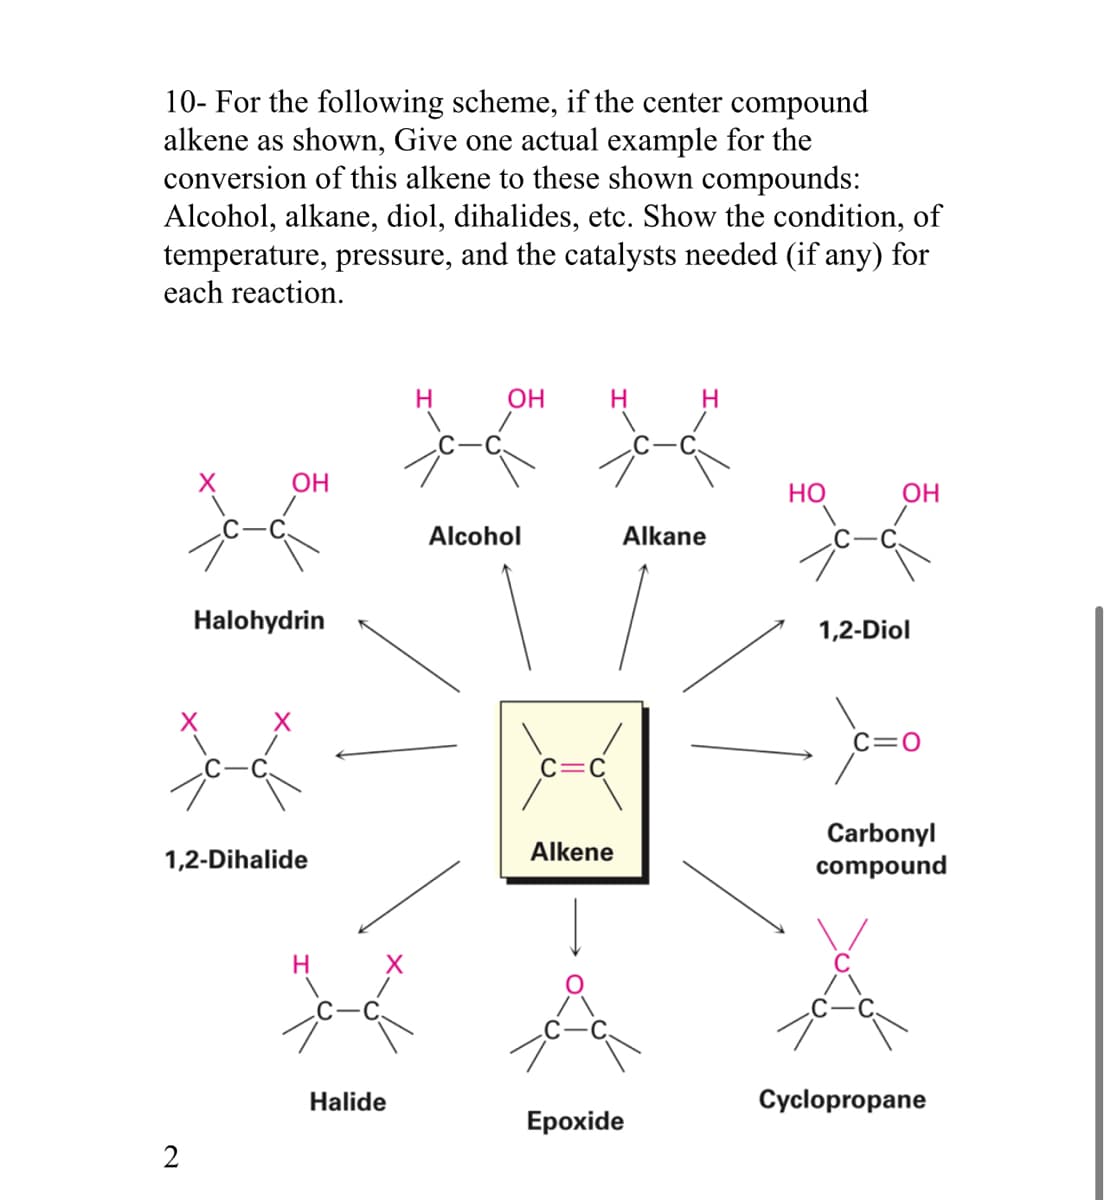 10- For the following scheme, if the center compound
alkene as shown, Give one actual example for the
conversion of this alkene to these shown compounds:
Alcohol, alkane, diol, dihalides, etc. Show the condition, of
temperature, pressure, and the catalysts needed (if any) for
each reaction.
OH
2
Halohydrin
+4
1,2-Dihalide
H
Halide
H
OH
Alcohol
H
Alkene
H
Alkane
Epoxide
HO
1,2-Diol
C=O
Carbonyl
compound
Cyclopropane